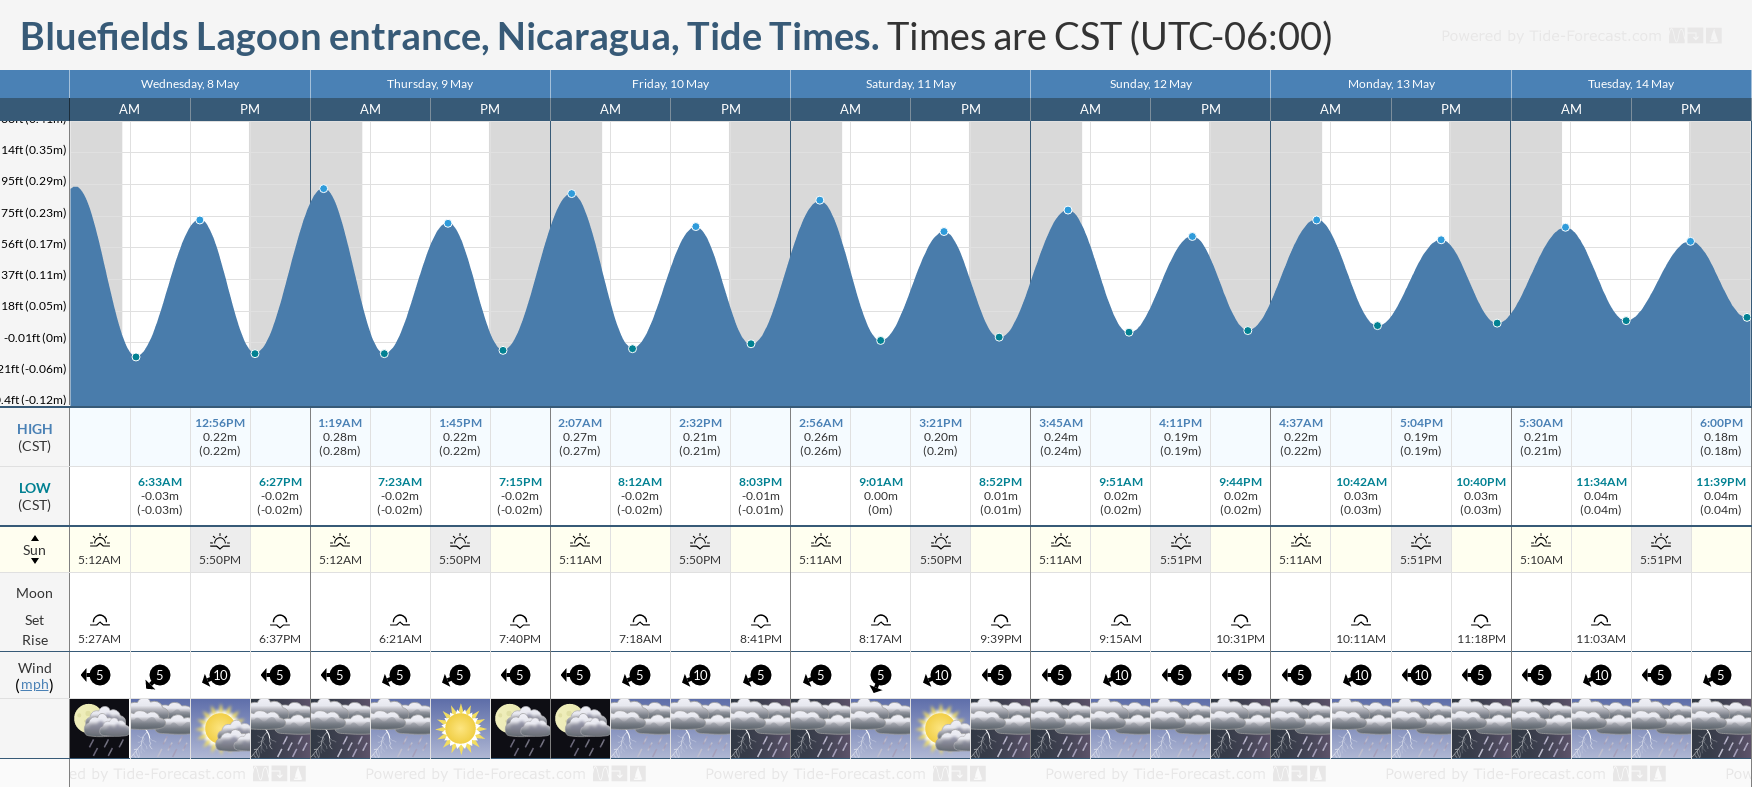 Bluefields Lagoon entrance, Nicaragua Tide Chart including high and low tide tide times for the next 7 days